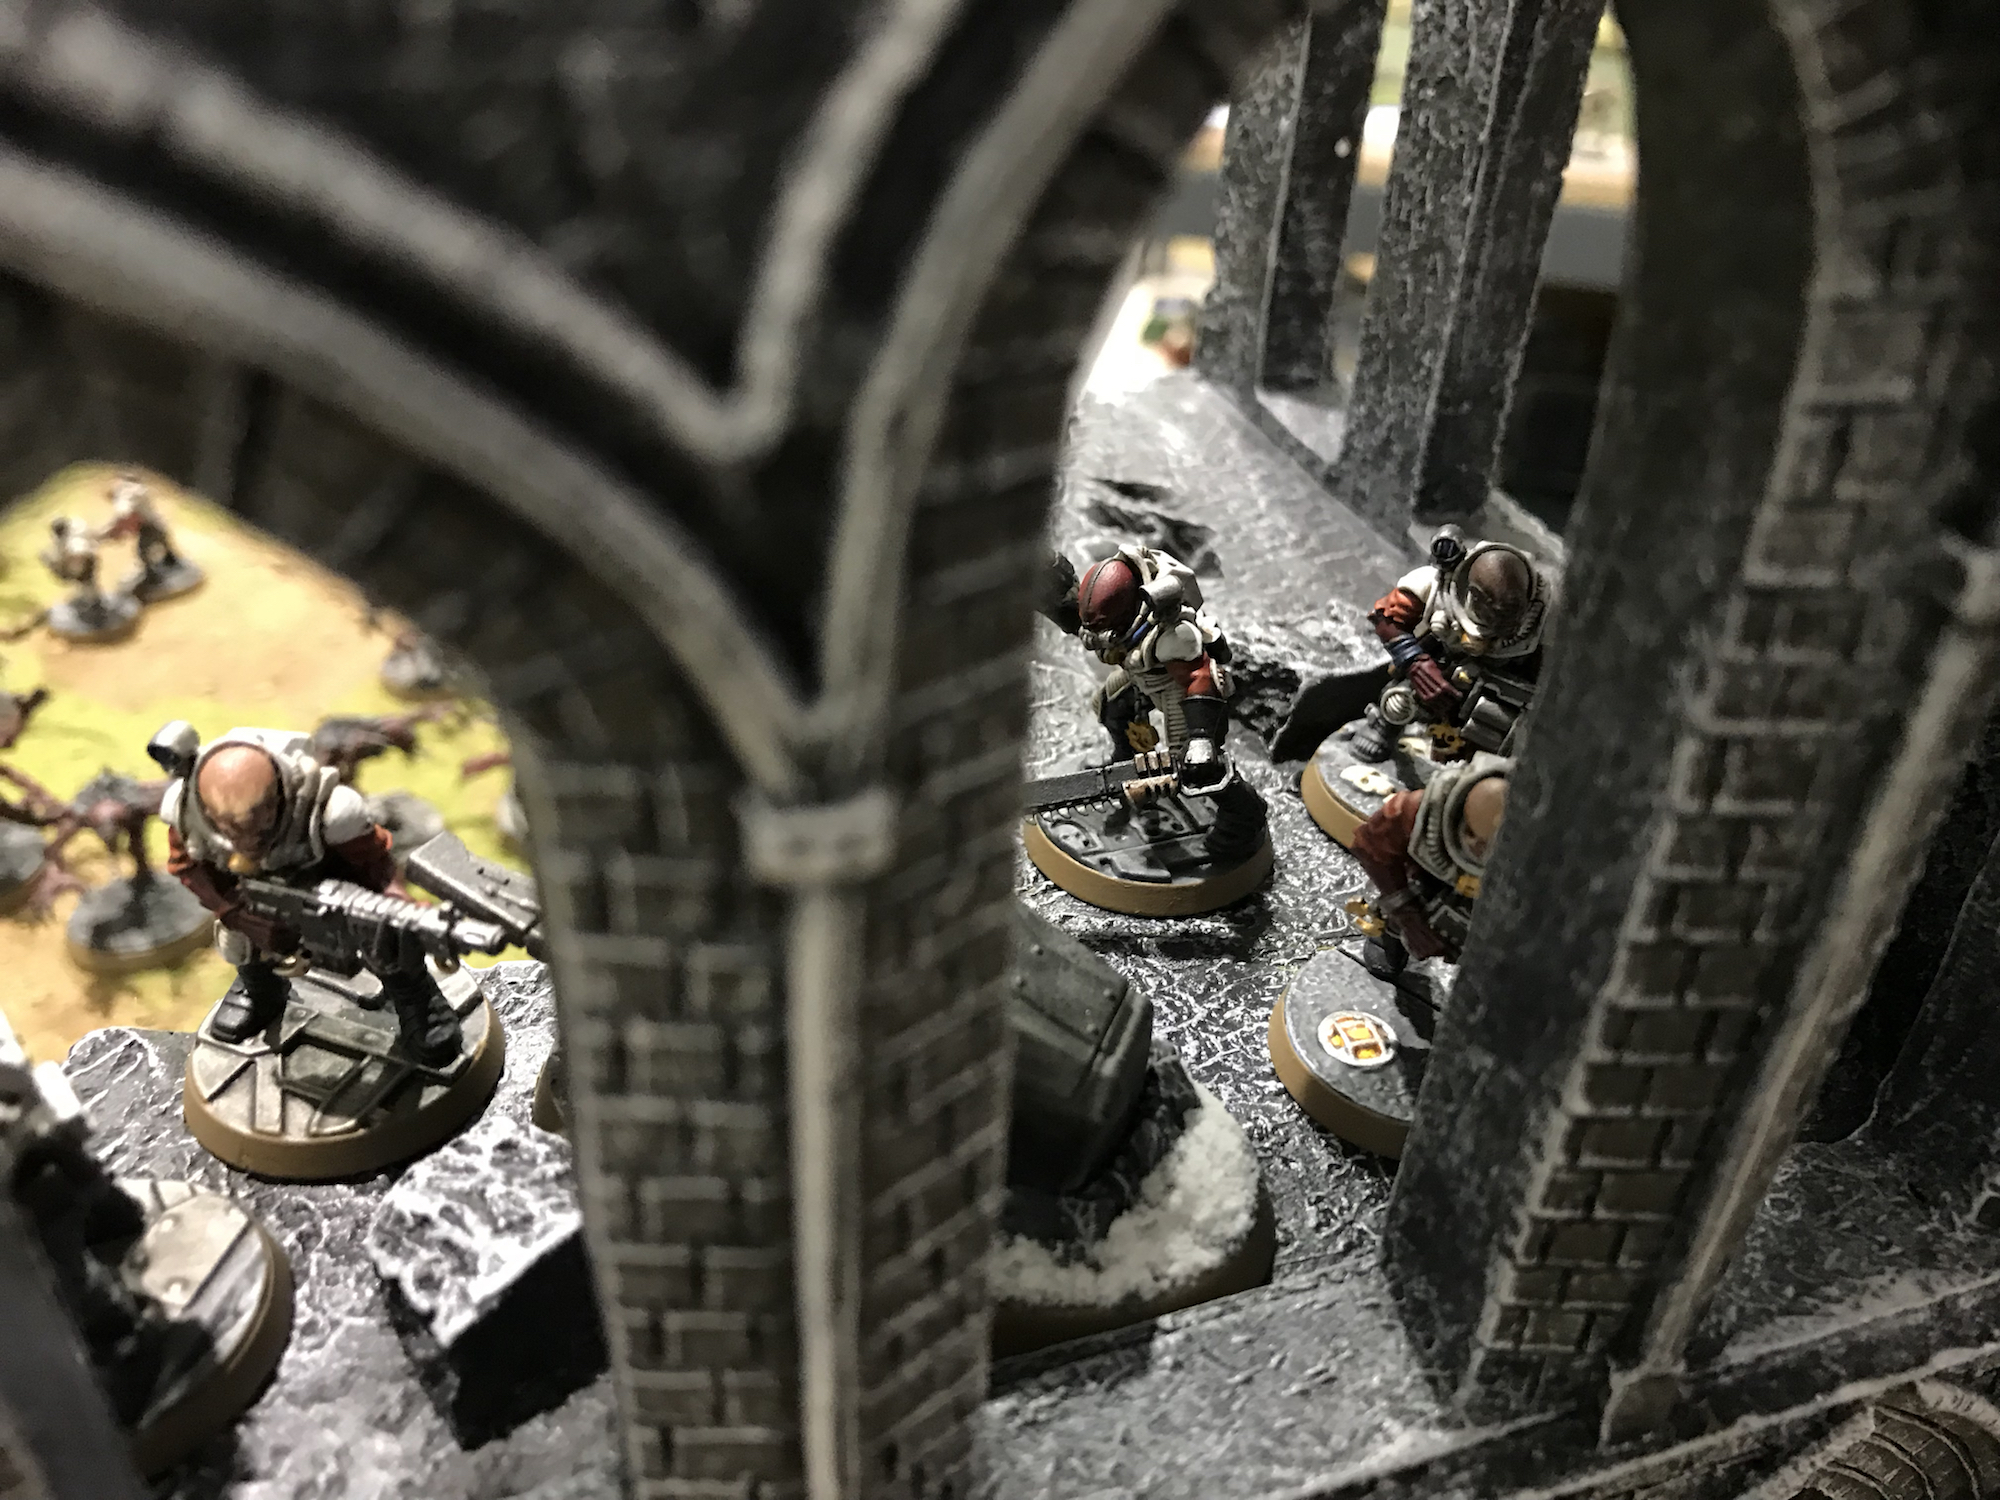 Genestealer Cult members holding their objective - their dead pile is in the background - GSC & Tyranids vs Astra Militarum